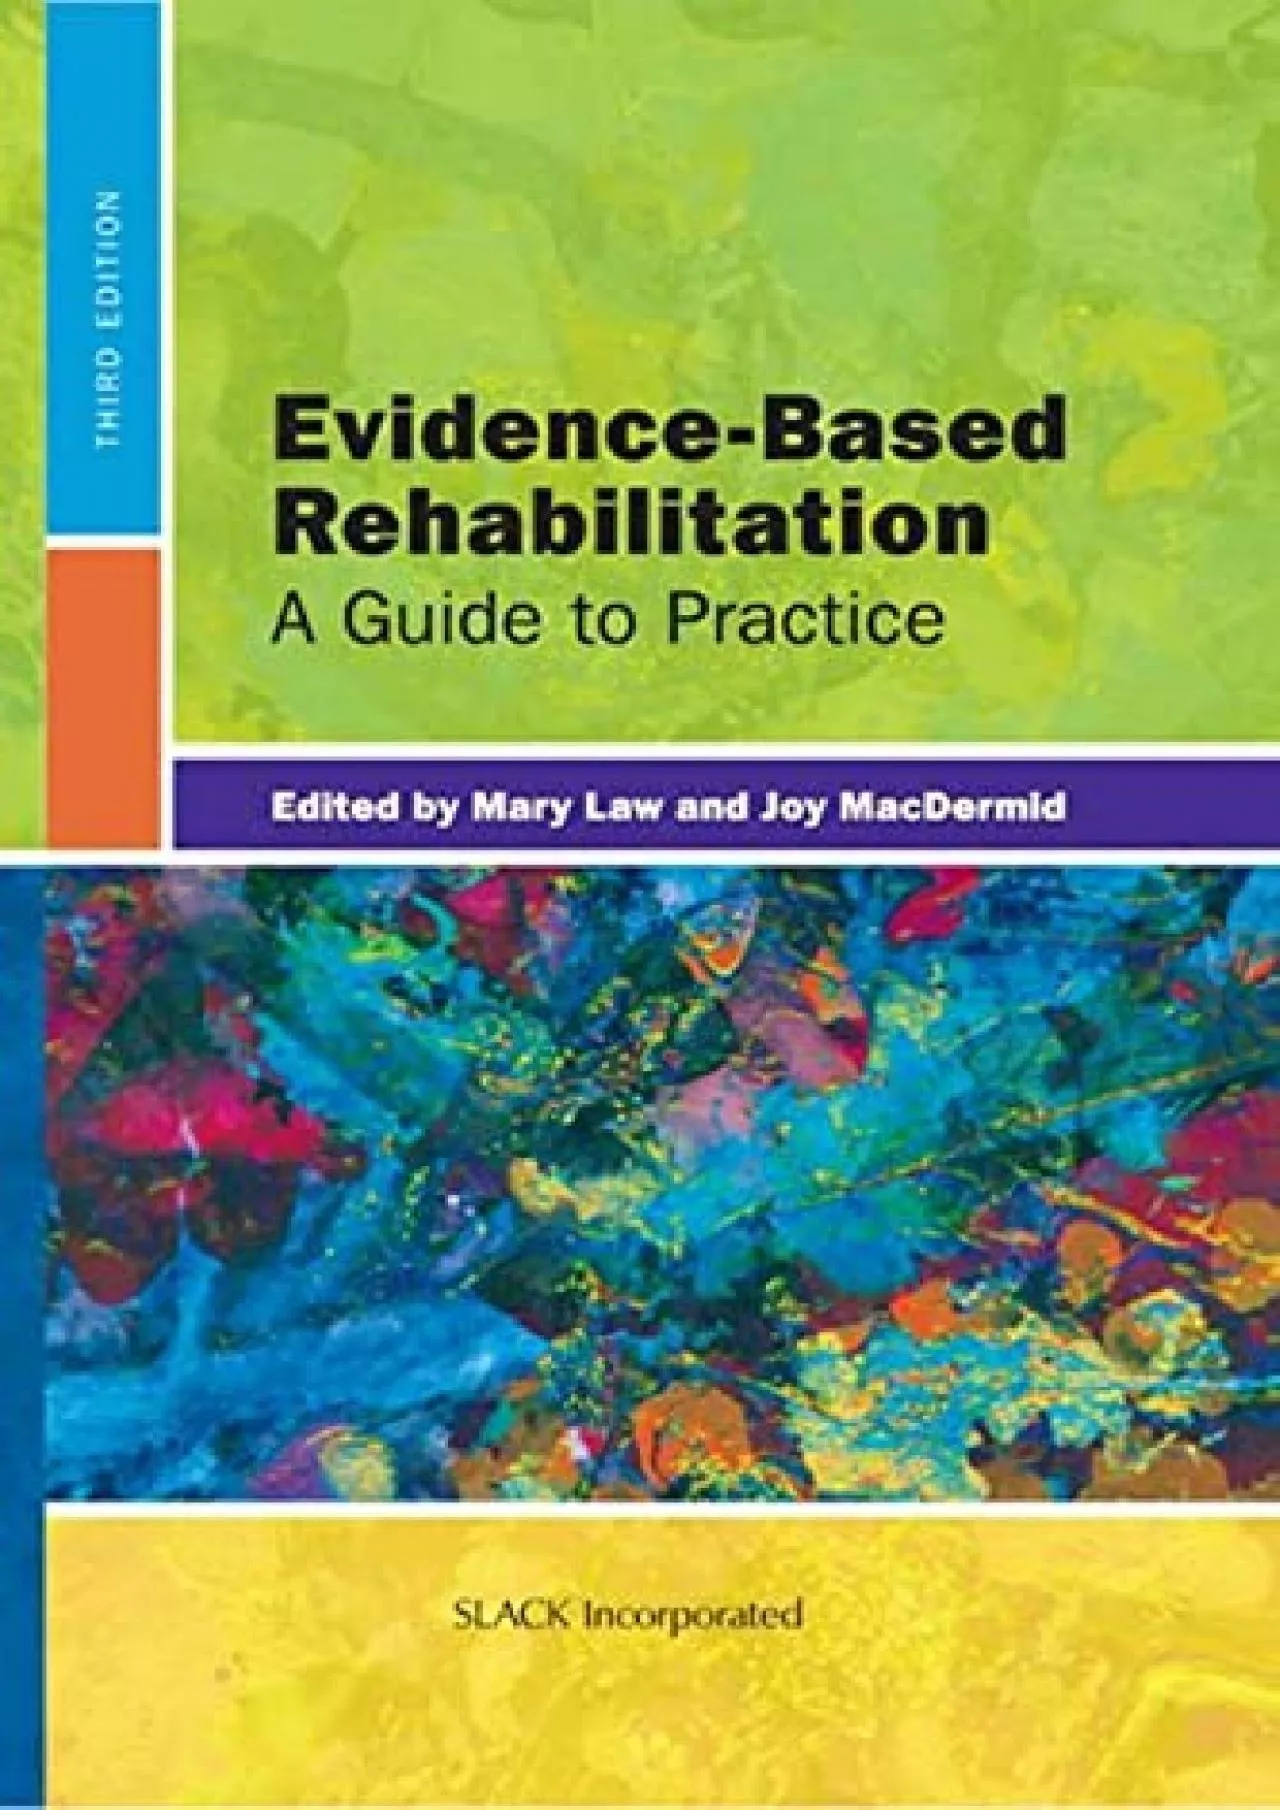 (DOWNLOAD)-Evidence-Based Rehabilitation: A Guide to Practice